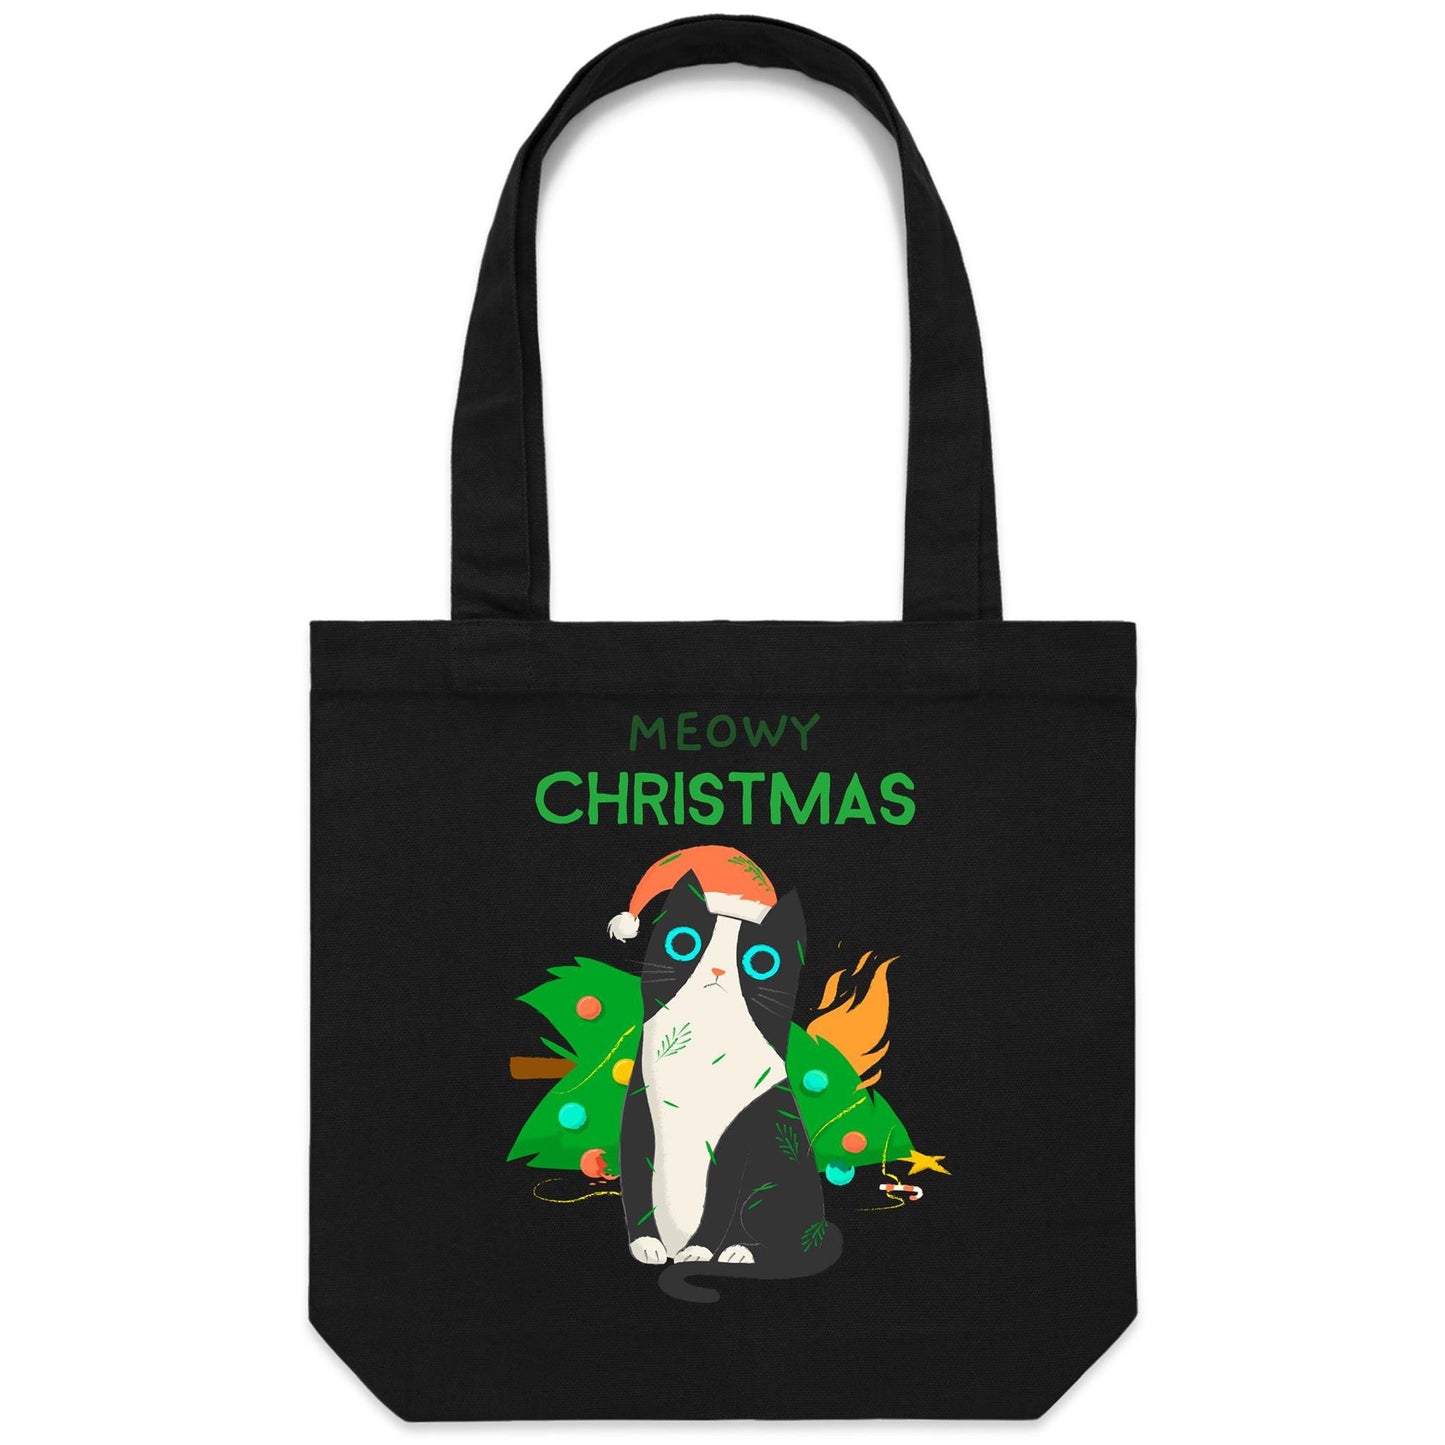 Meowy Christmas - Canvas Tote Bag Black One Size Christmas Tote Bag Merry Christmas